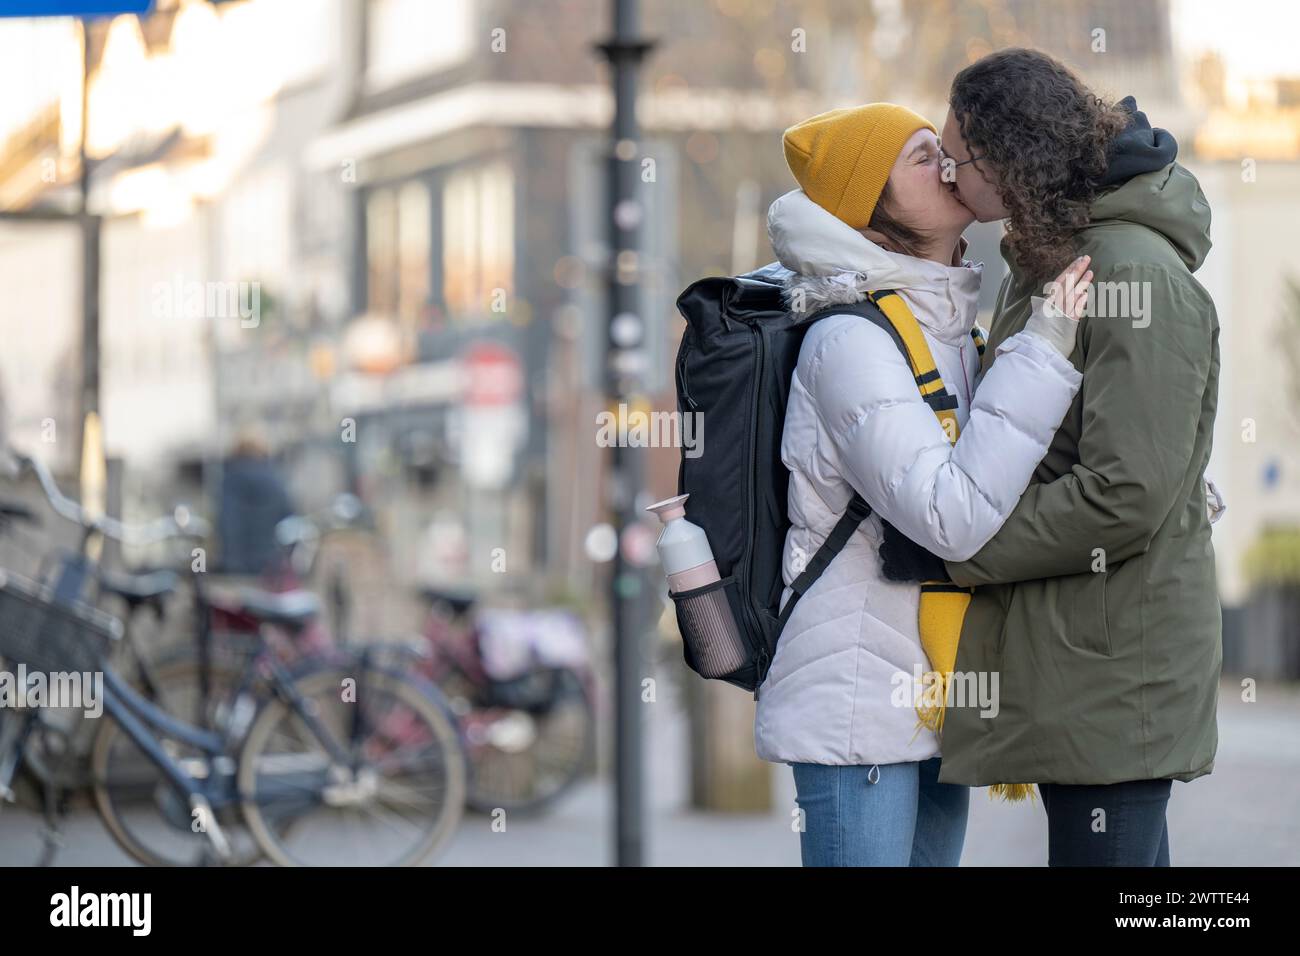 Couple sharing a kiss on a city street. Stock Photo